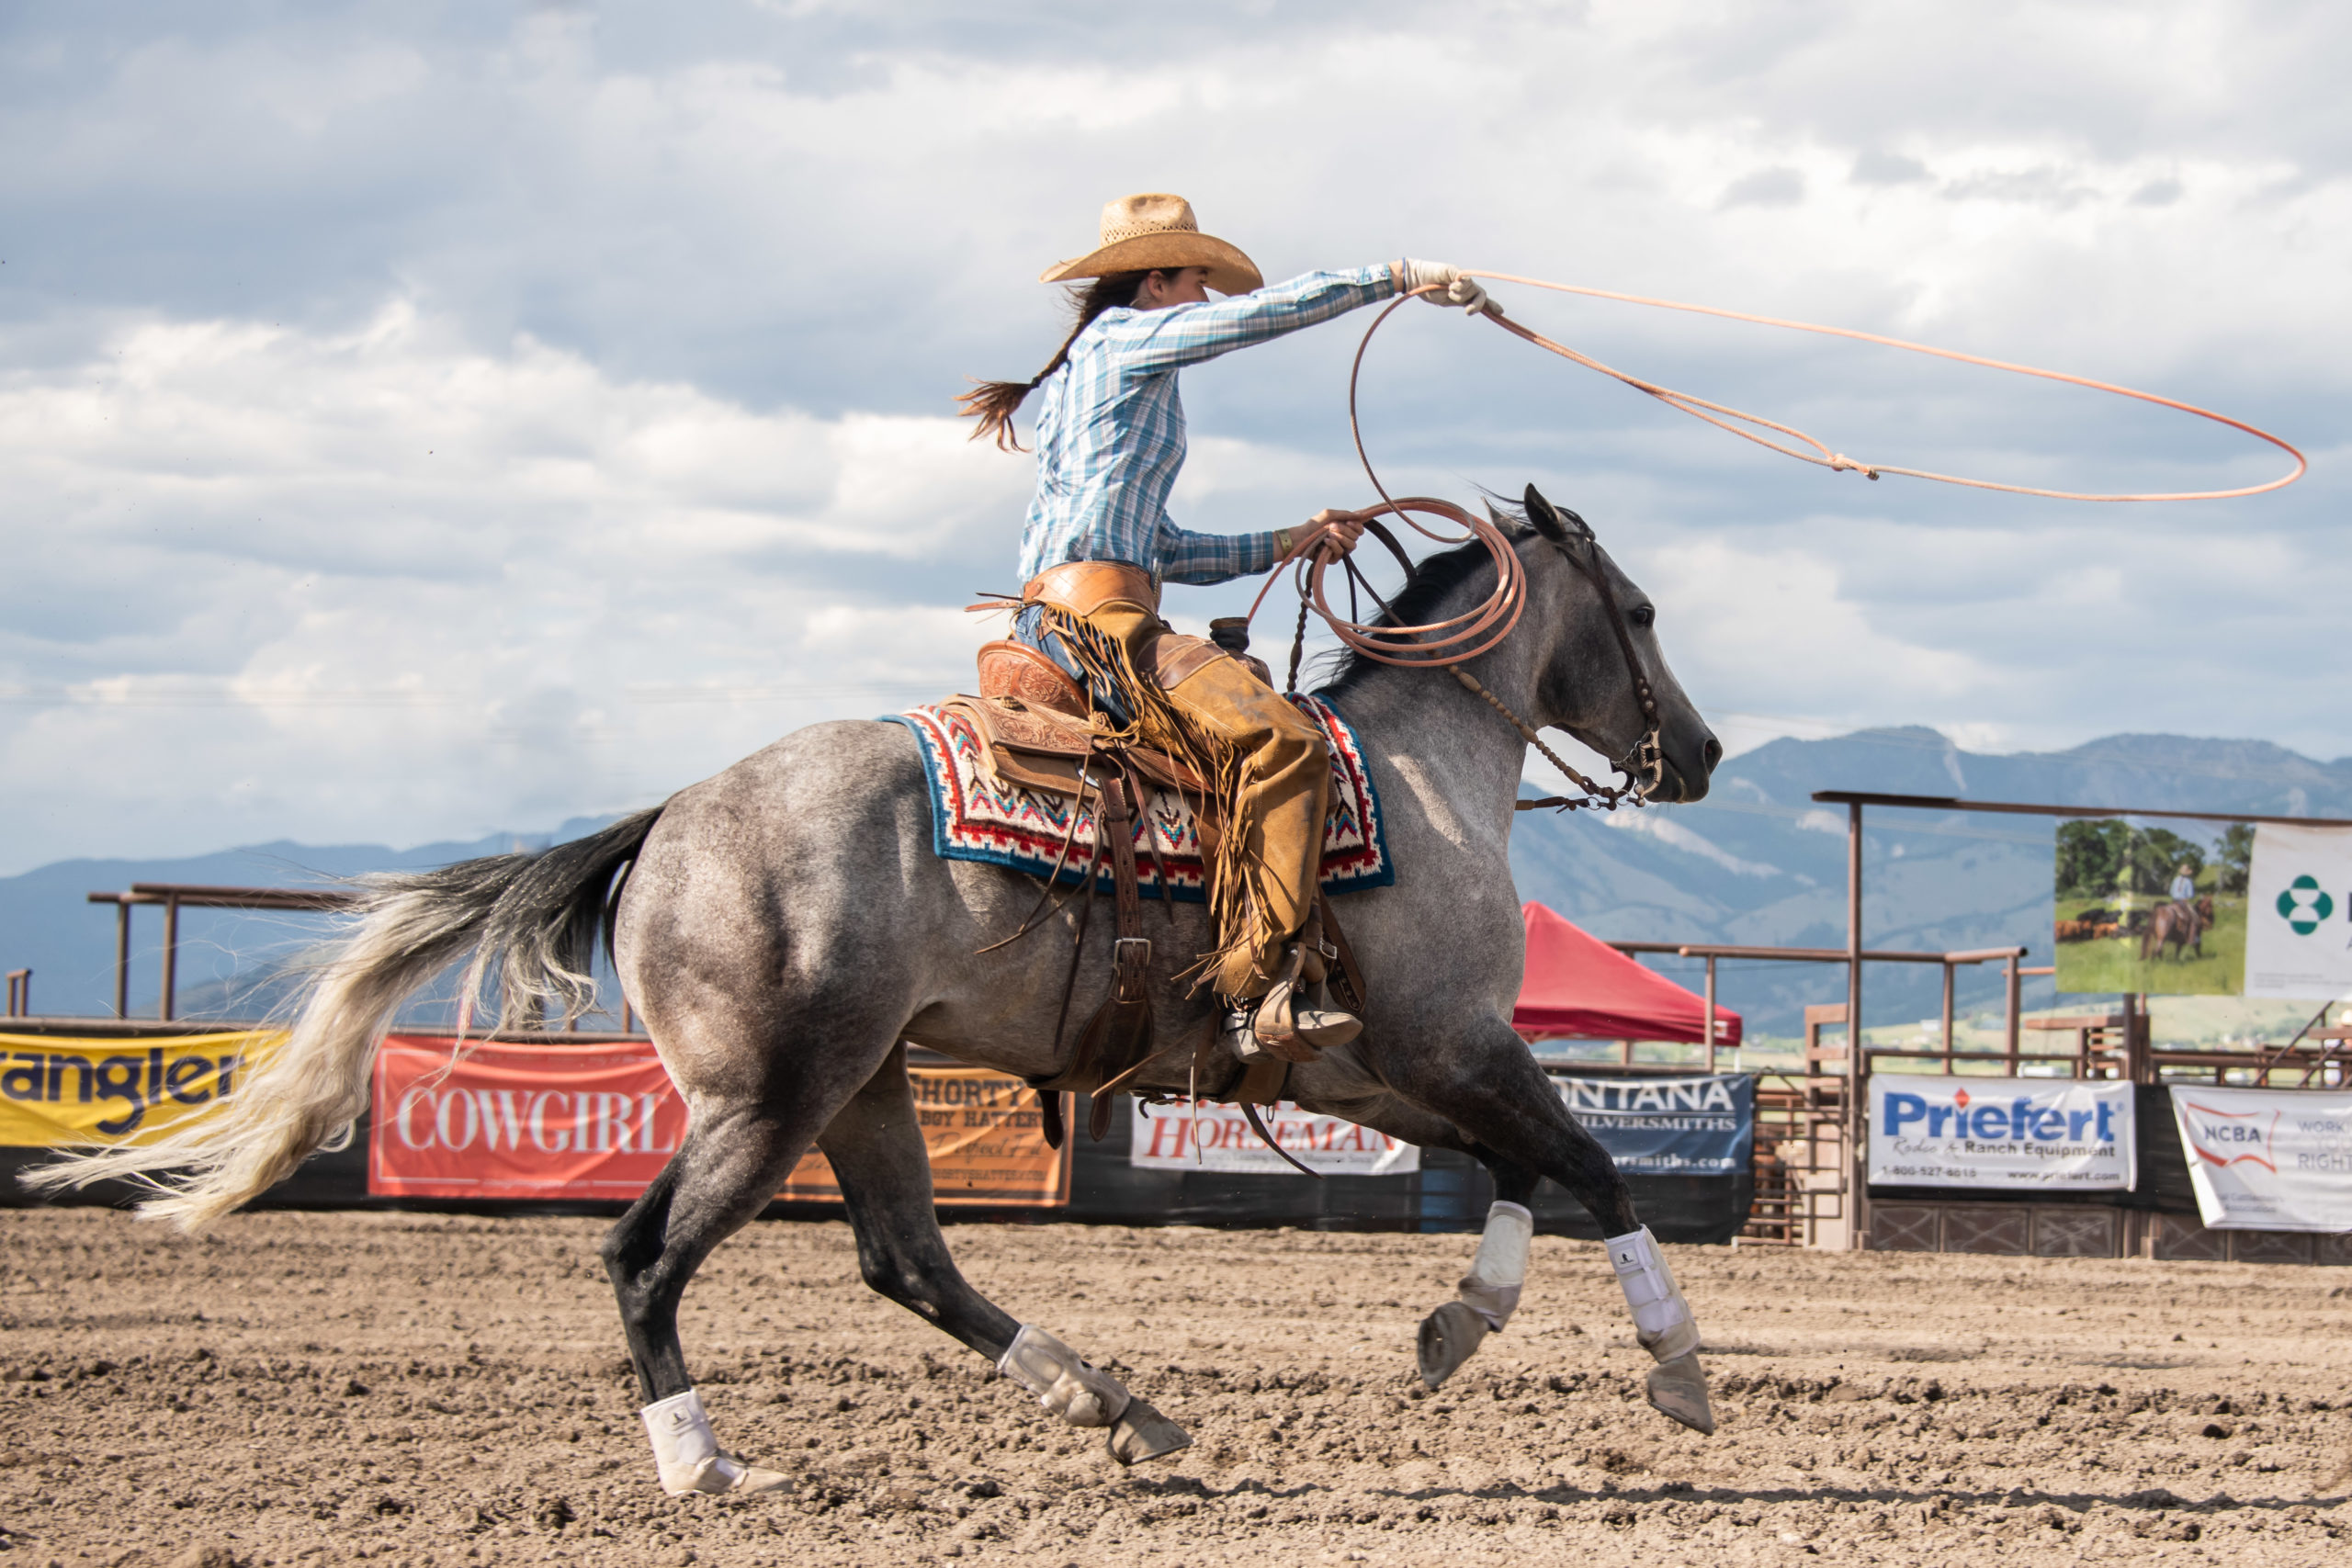 Cowgirl on a grey horse gallops after a steer with her rope ready during a ranch rodeo in Montana at the Art of the Cowgirl event.